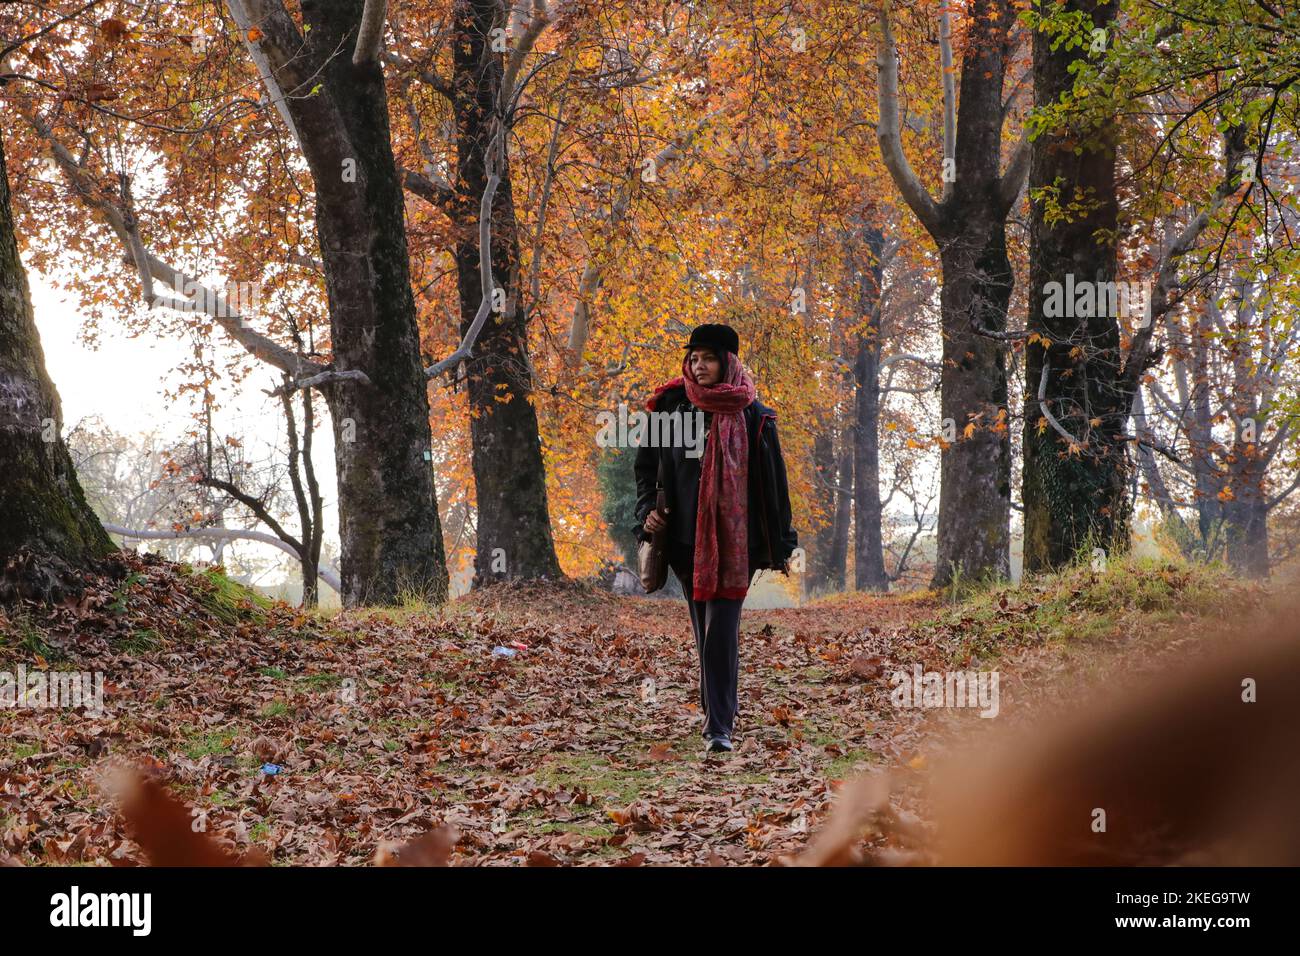 November 12, 2022, Srinagar, Jammu and Kashmir, India: A woman walks on fallen leaves of mighty Chinar tree at the famous Nishat Garden, Srinagar, Kashmir. Autumn colors are reaching their peak with trees particularly Chinar changing their colors as the days are becoming shorter showcasing the approach of winter in Kashmir. (Credit Image: © Adil Abbas/ZUMA Press Wire) Stock Photo